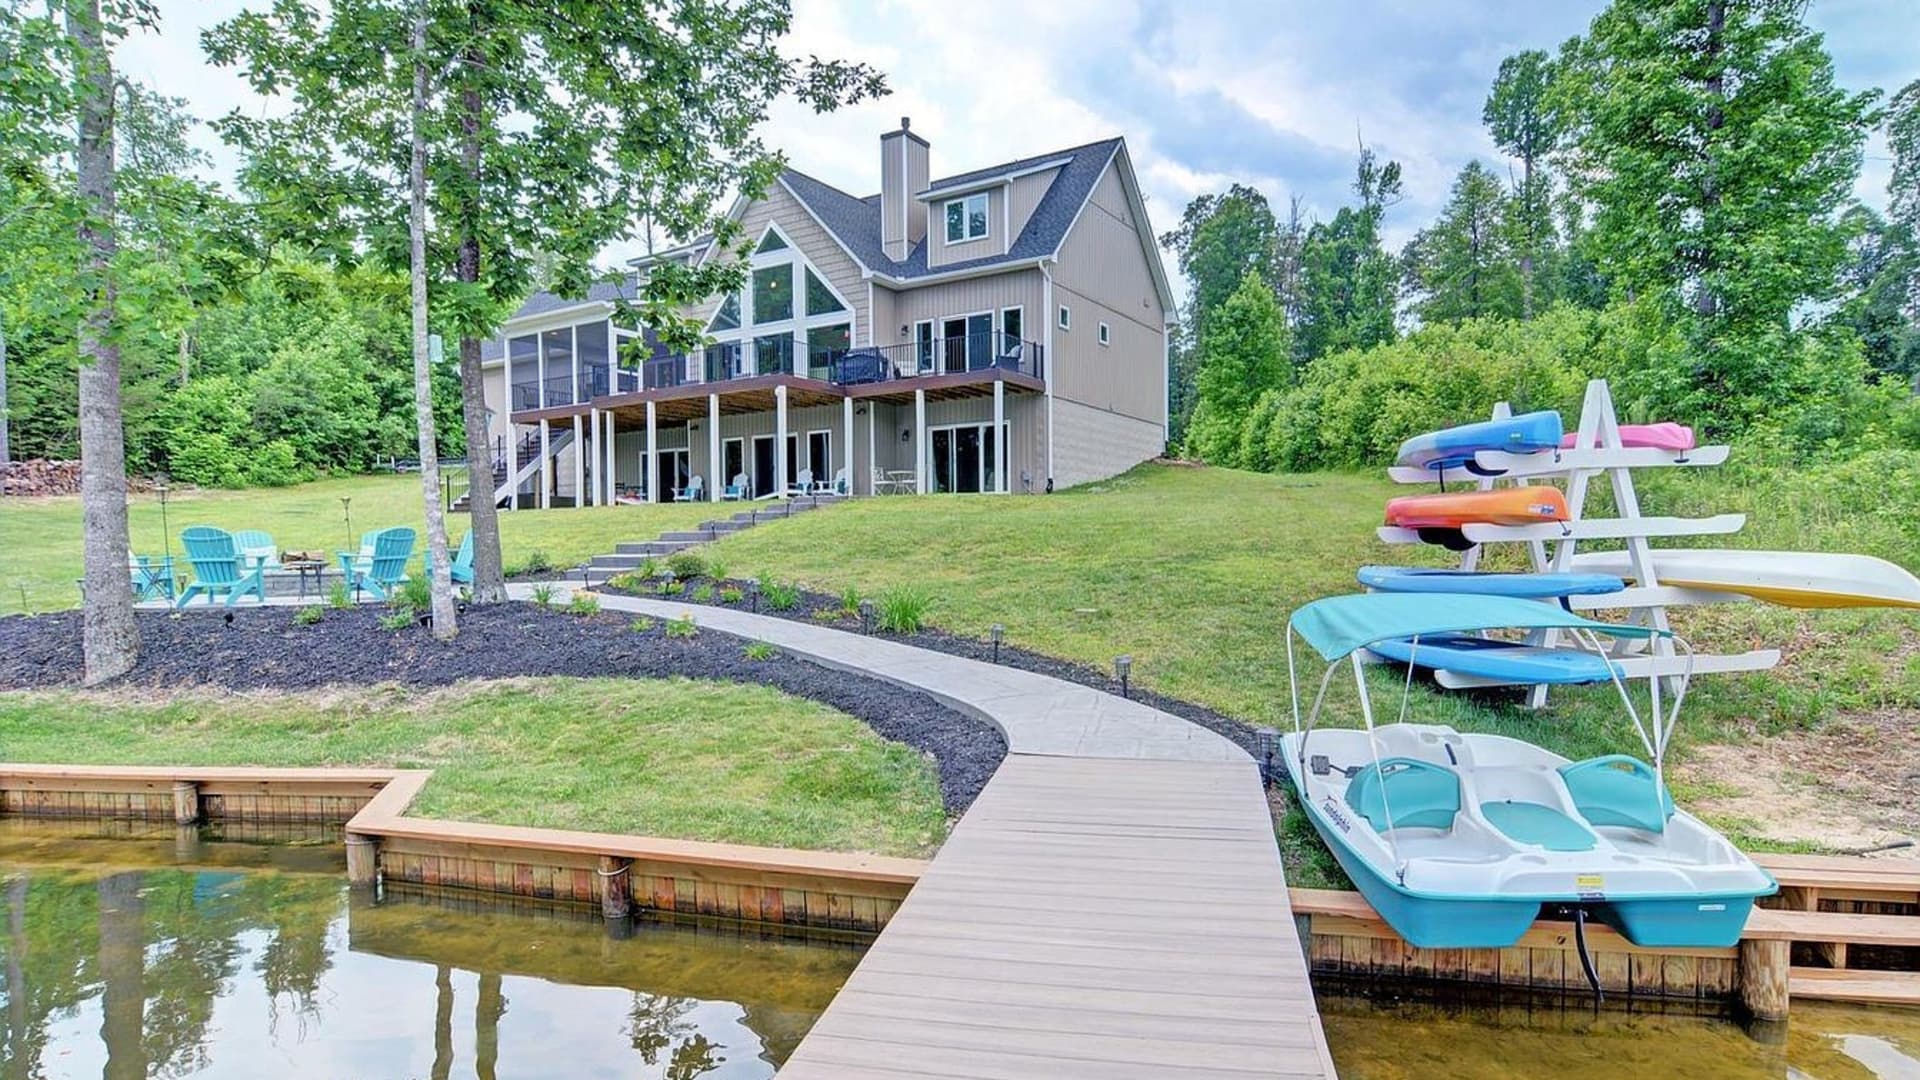 This lake-front 6-bedroom and 5.5-bathroom home is located in Mineral, Virginia.